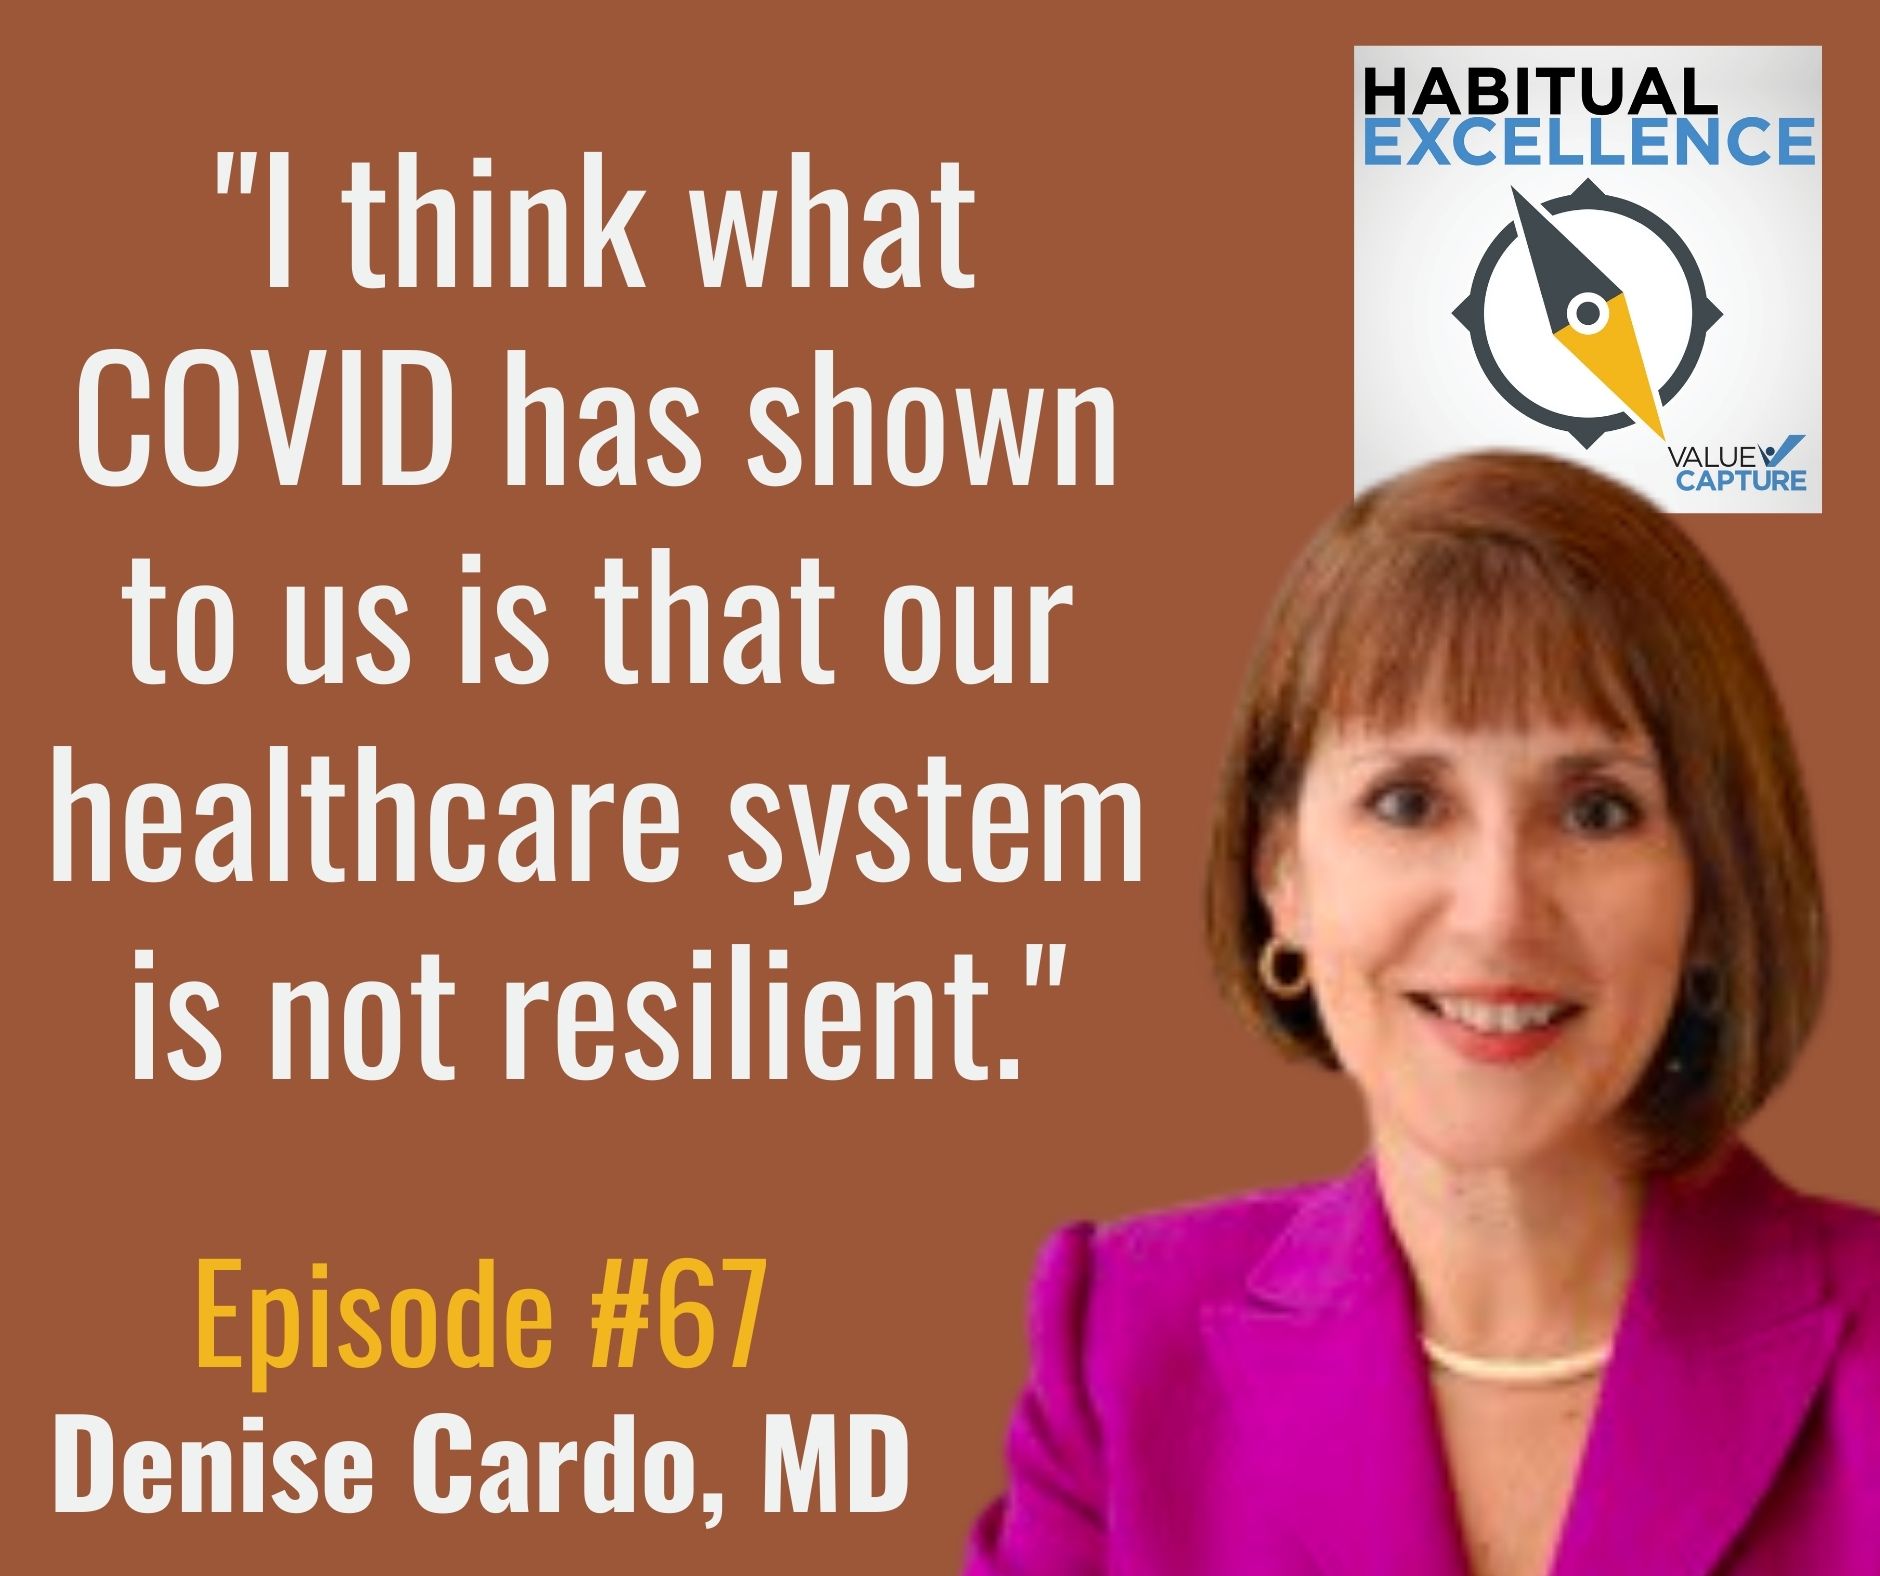 "I think what COVID has shown to us is that our healthcare system is not resilient."